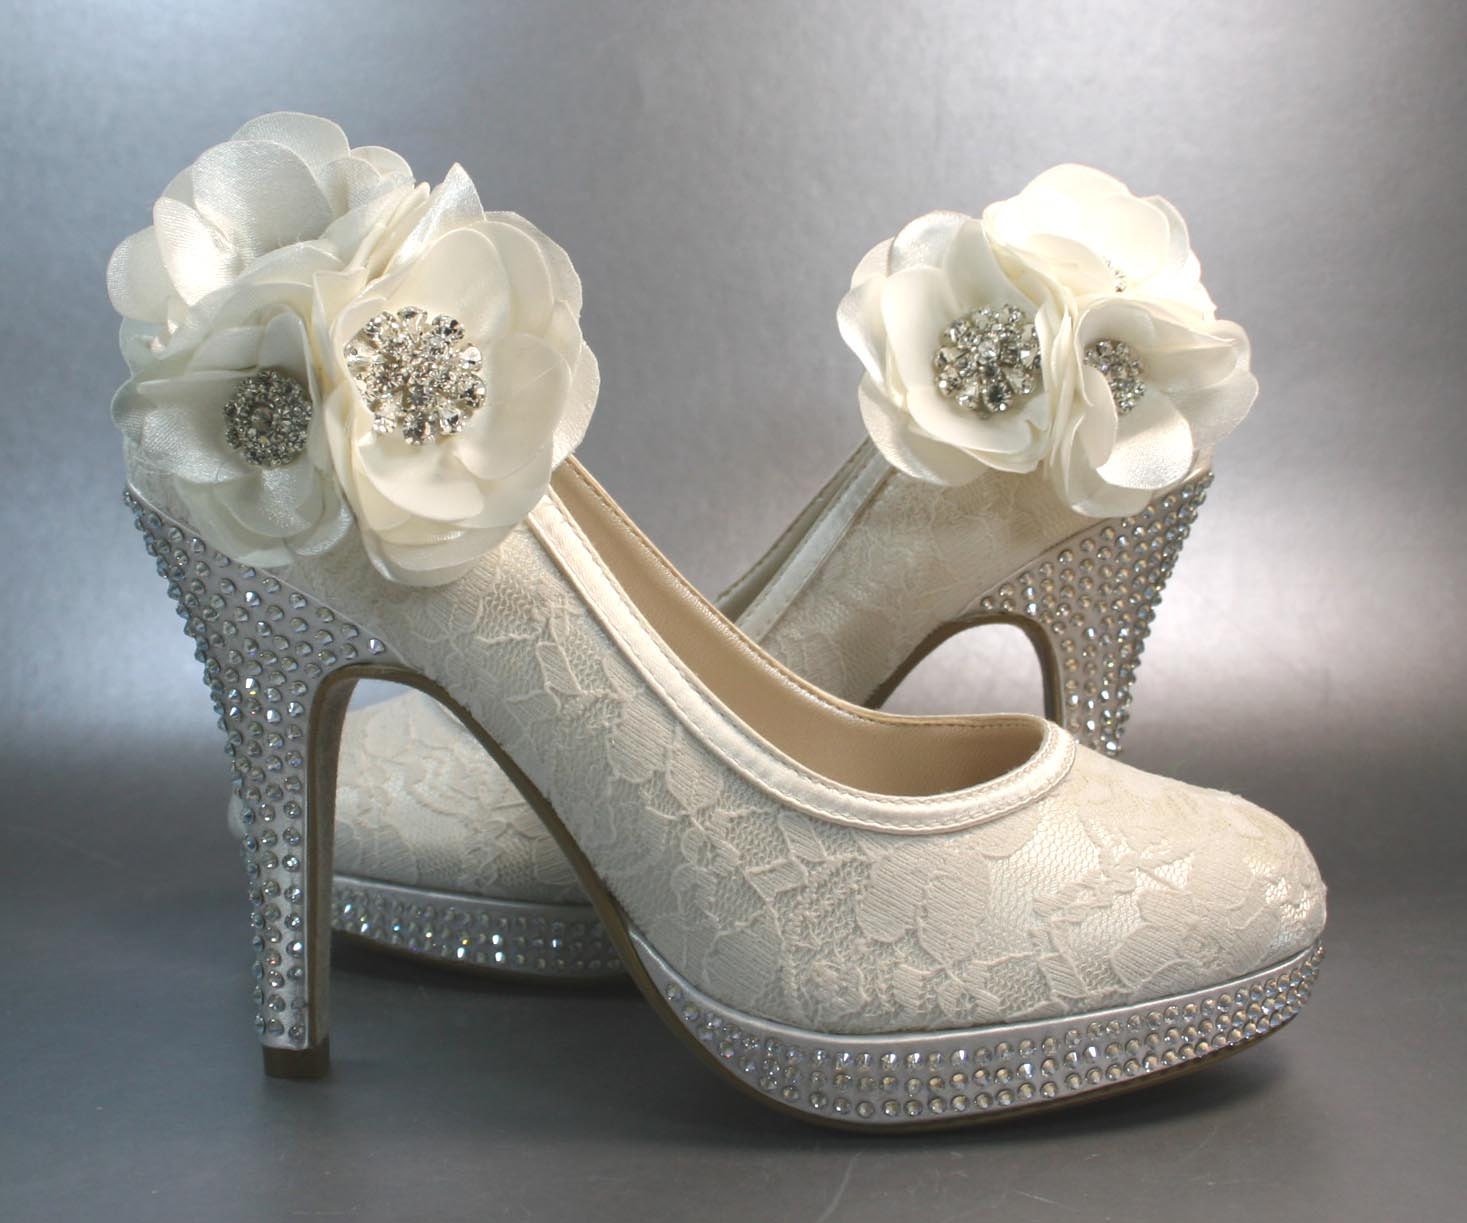 to Wedding Shoes -- Ivory Platform Heels with Lace Overlay and Ivory ...